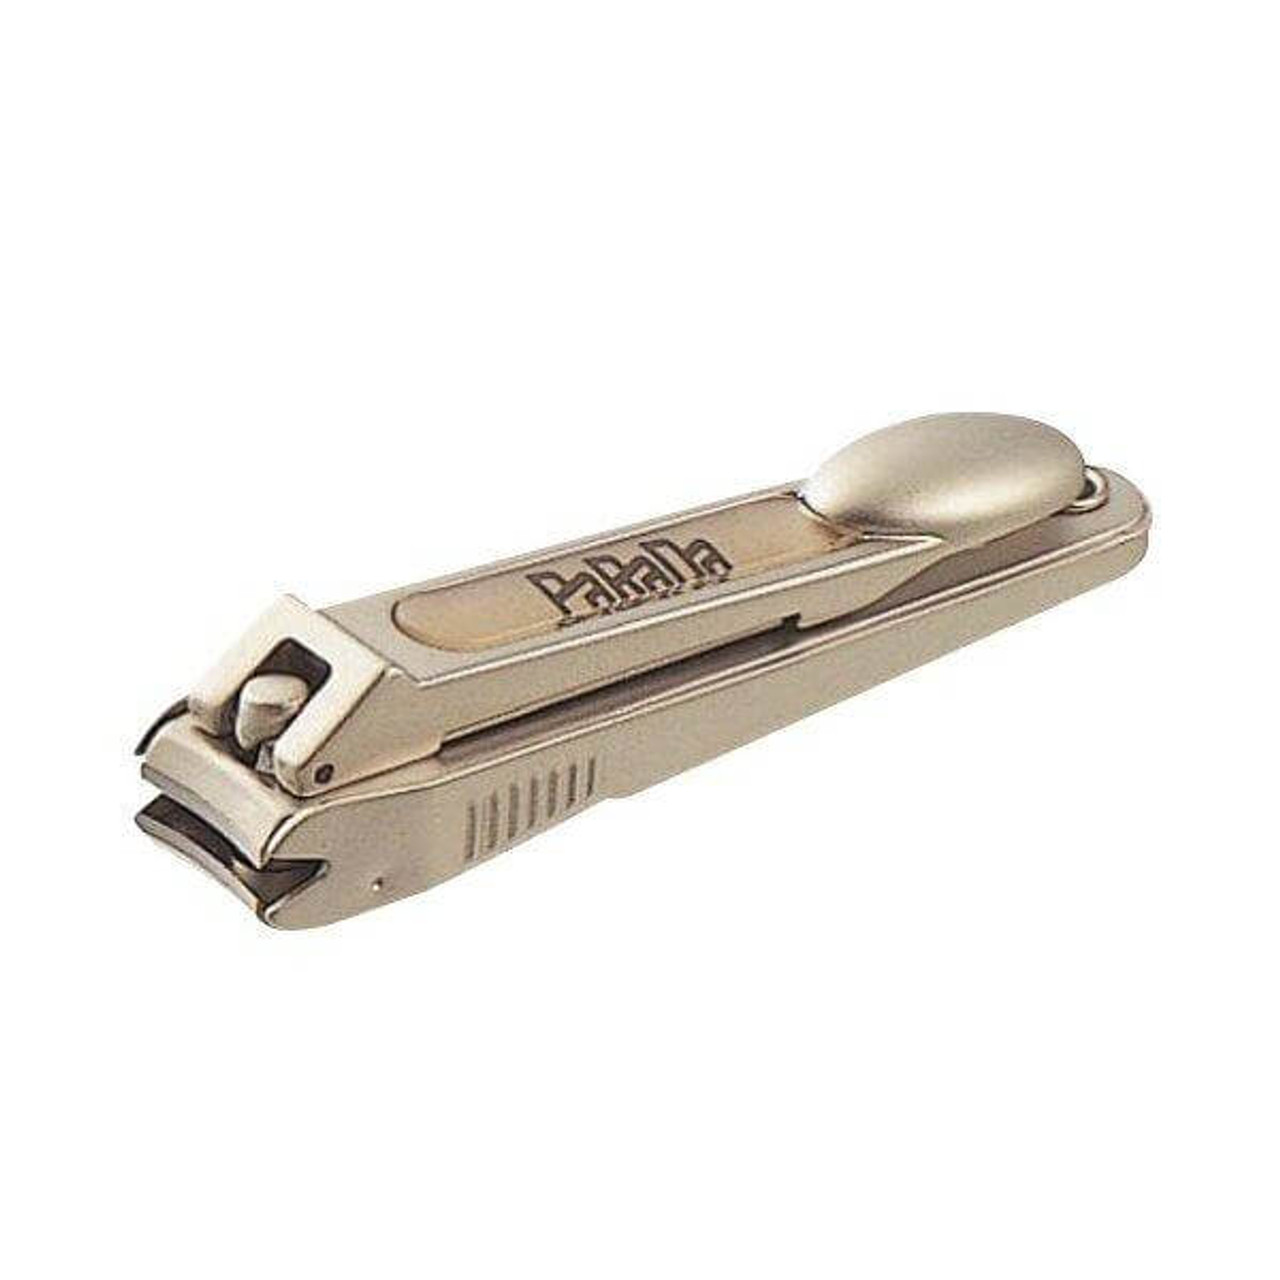 2022 Large Toenails Clippers Straight Edge Toenails Clippers